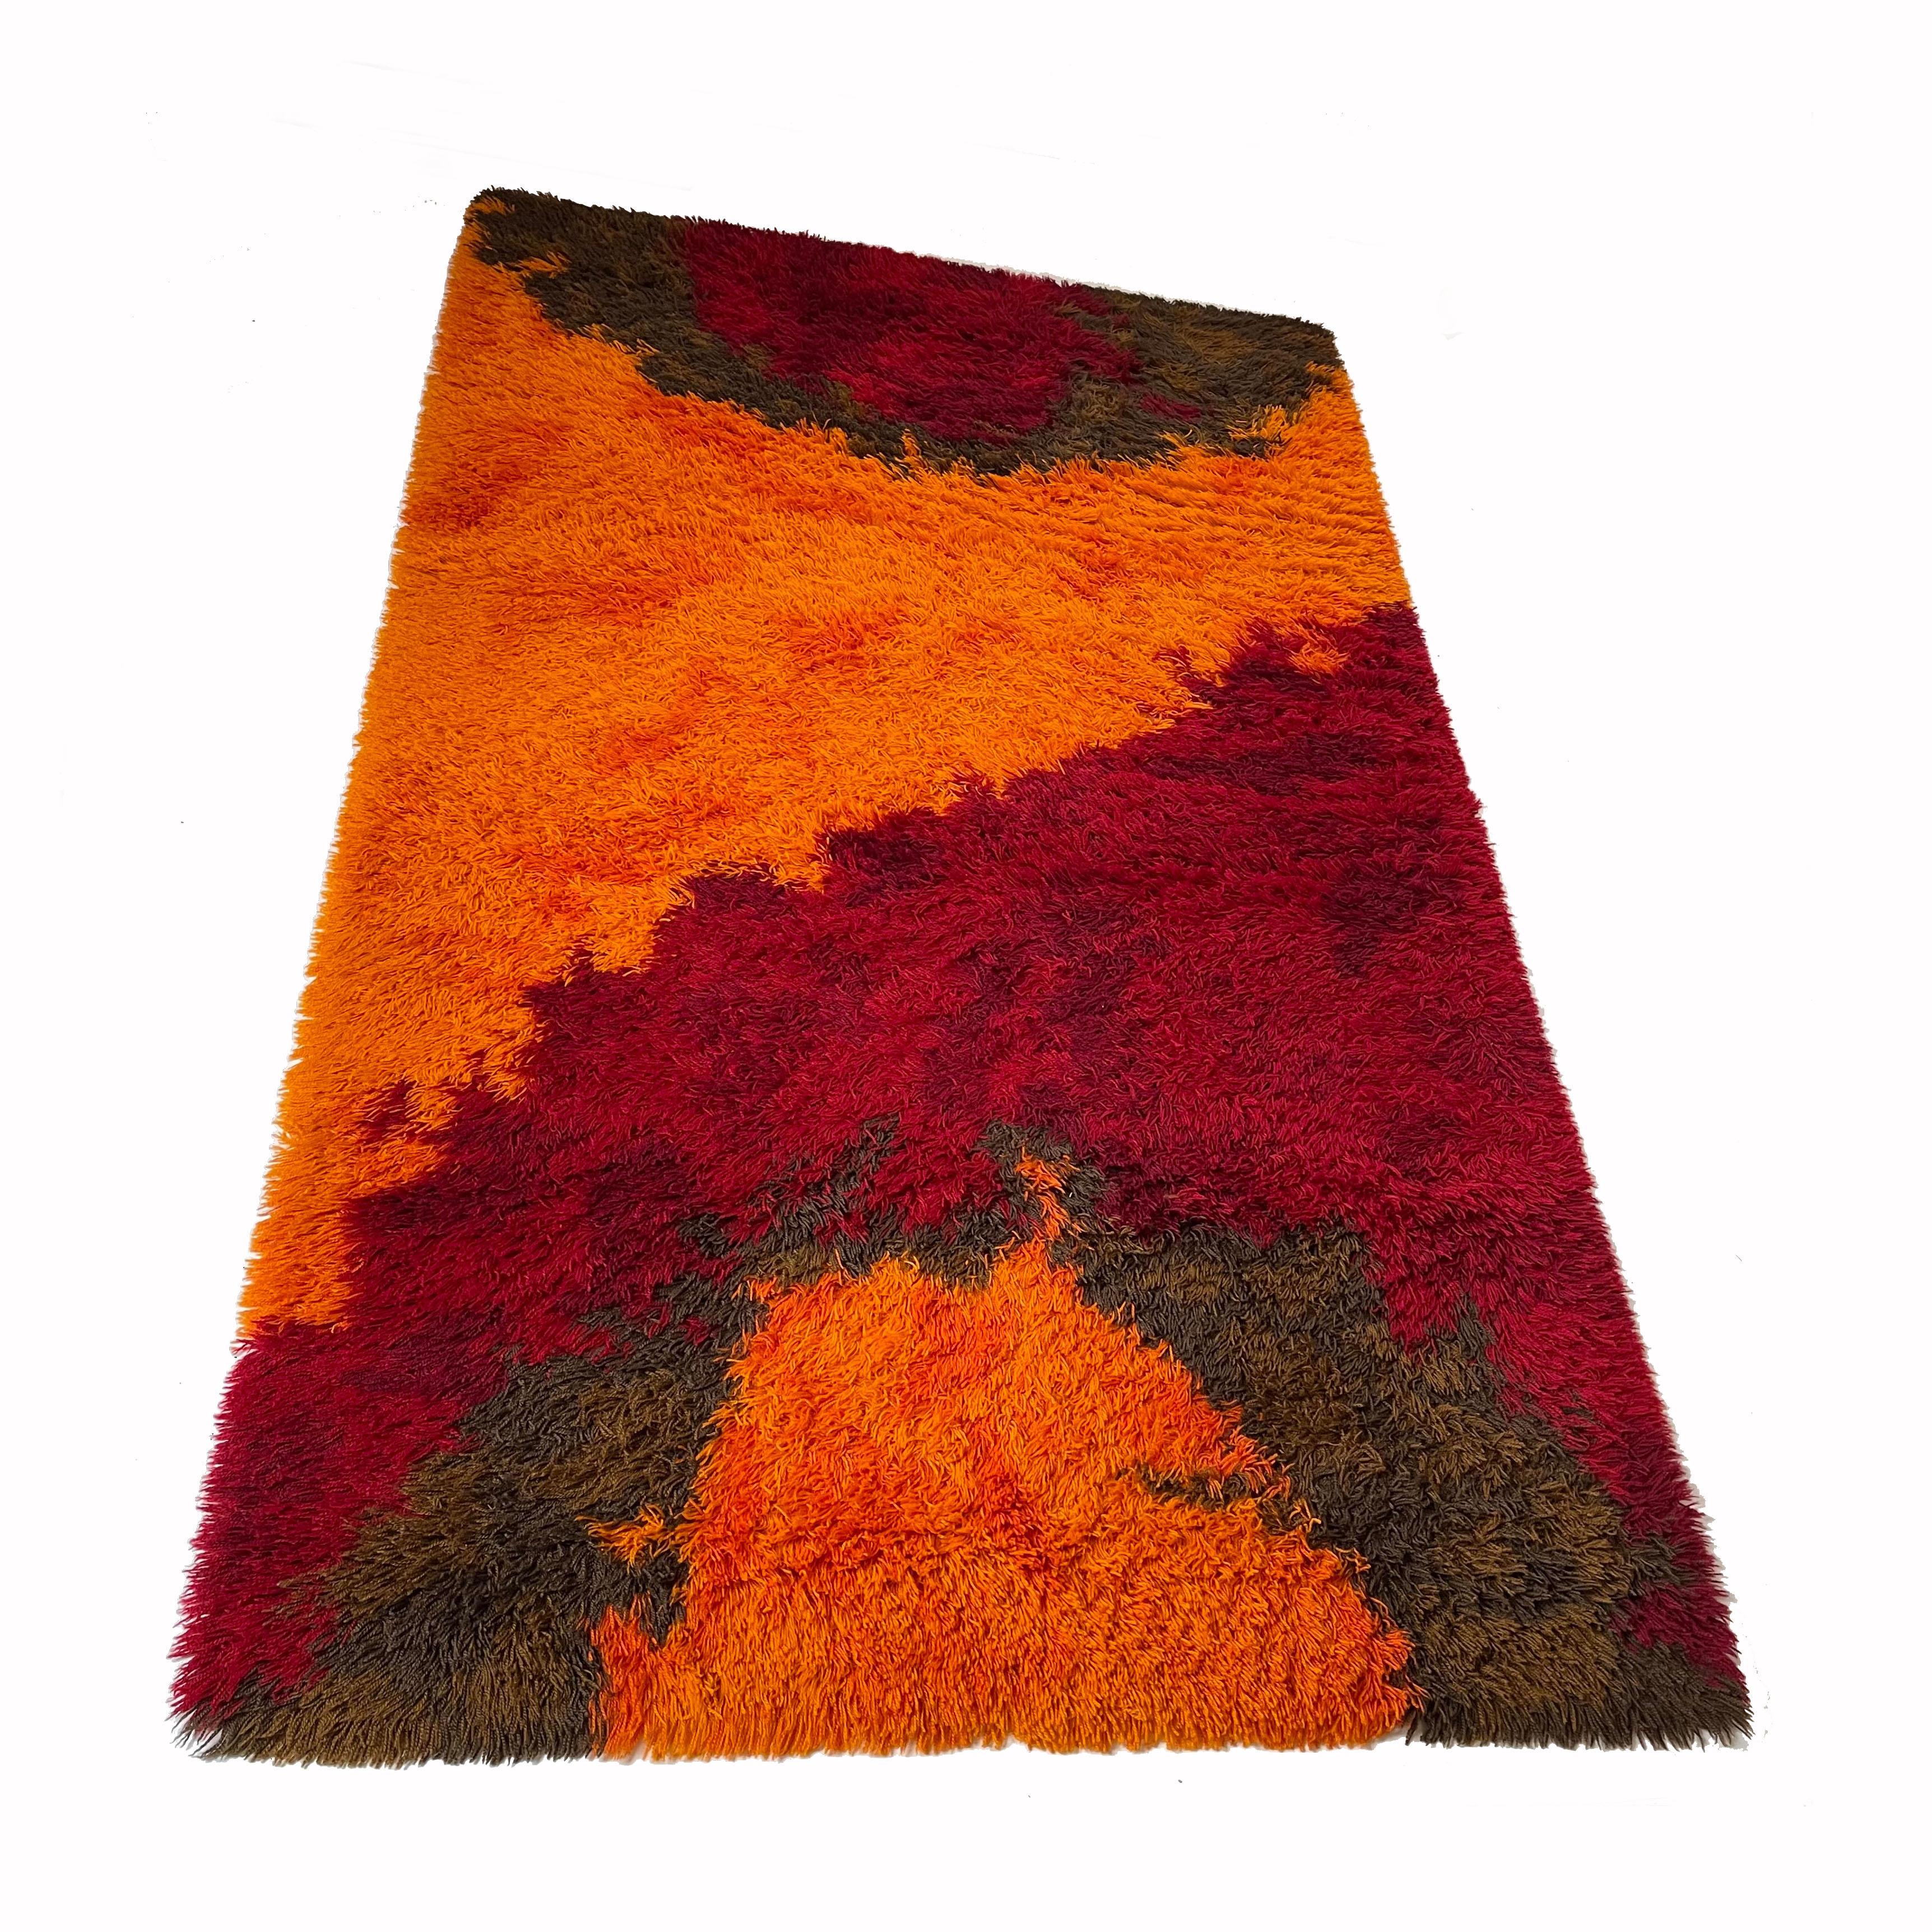 Article:

xxl High pile Rya rug


Decade:

1970s


Producer:

EGE RYA de luxe Taepper, Denmark


Material:

100% pure new wool pile



This rug is a great example of 1970s Pop Art interior. Made in high quality Danish Rya